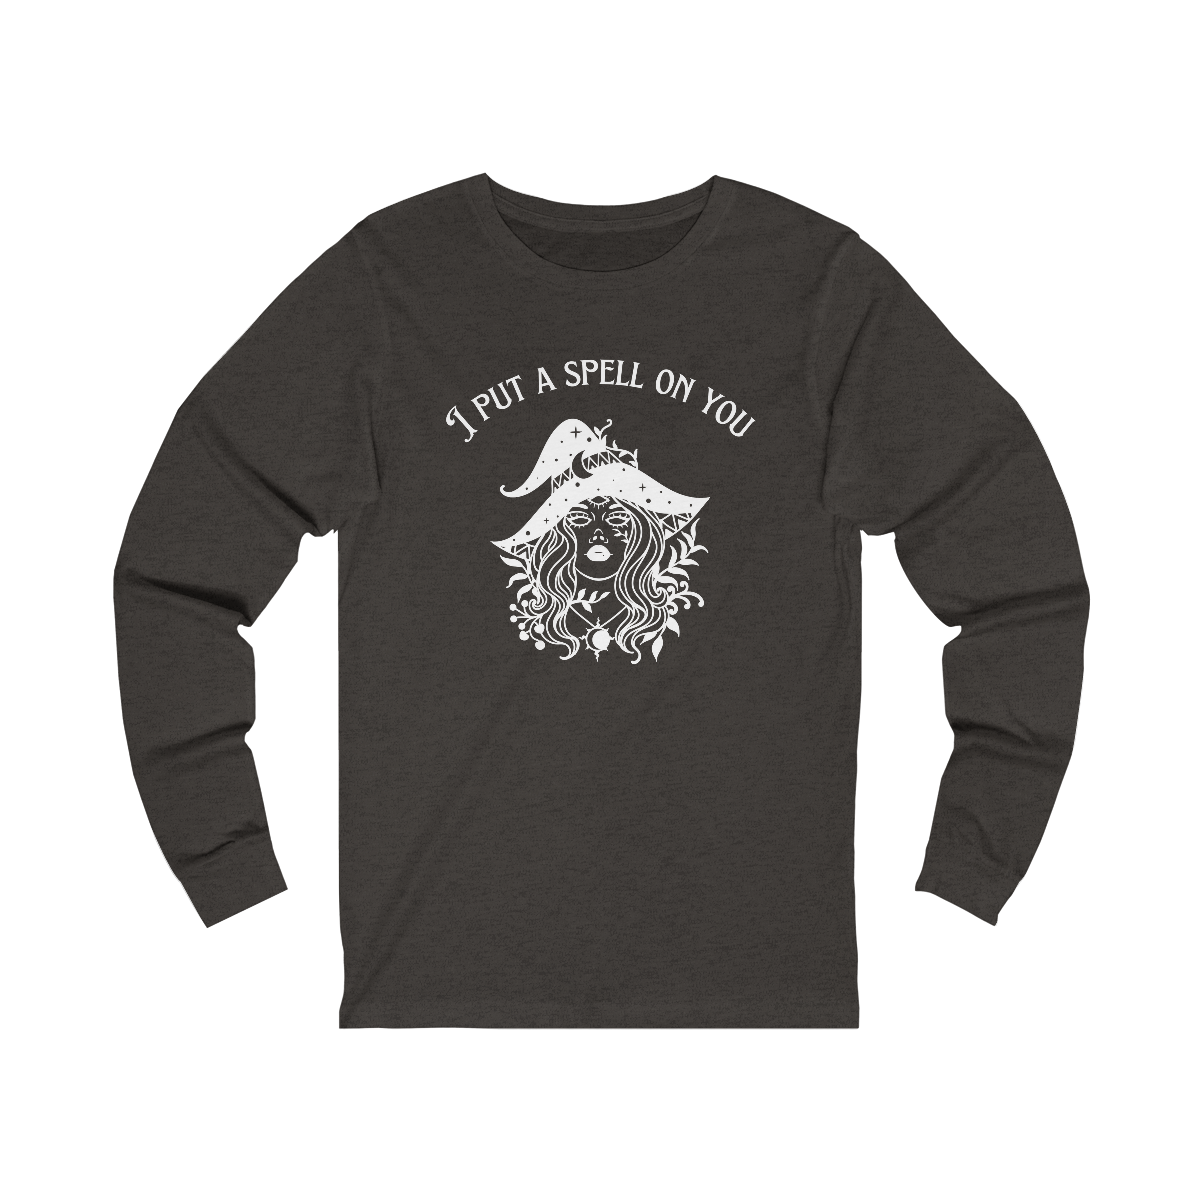 I PUT A SPELL ON YOU Long Sleeve Tee Unisex